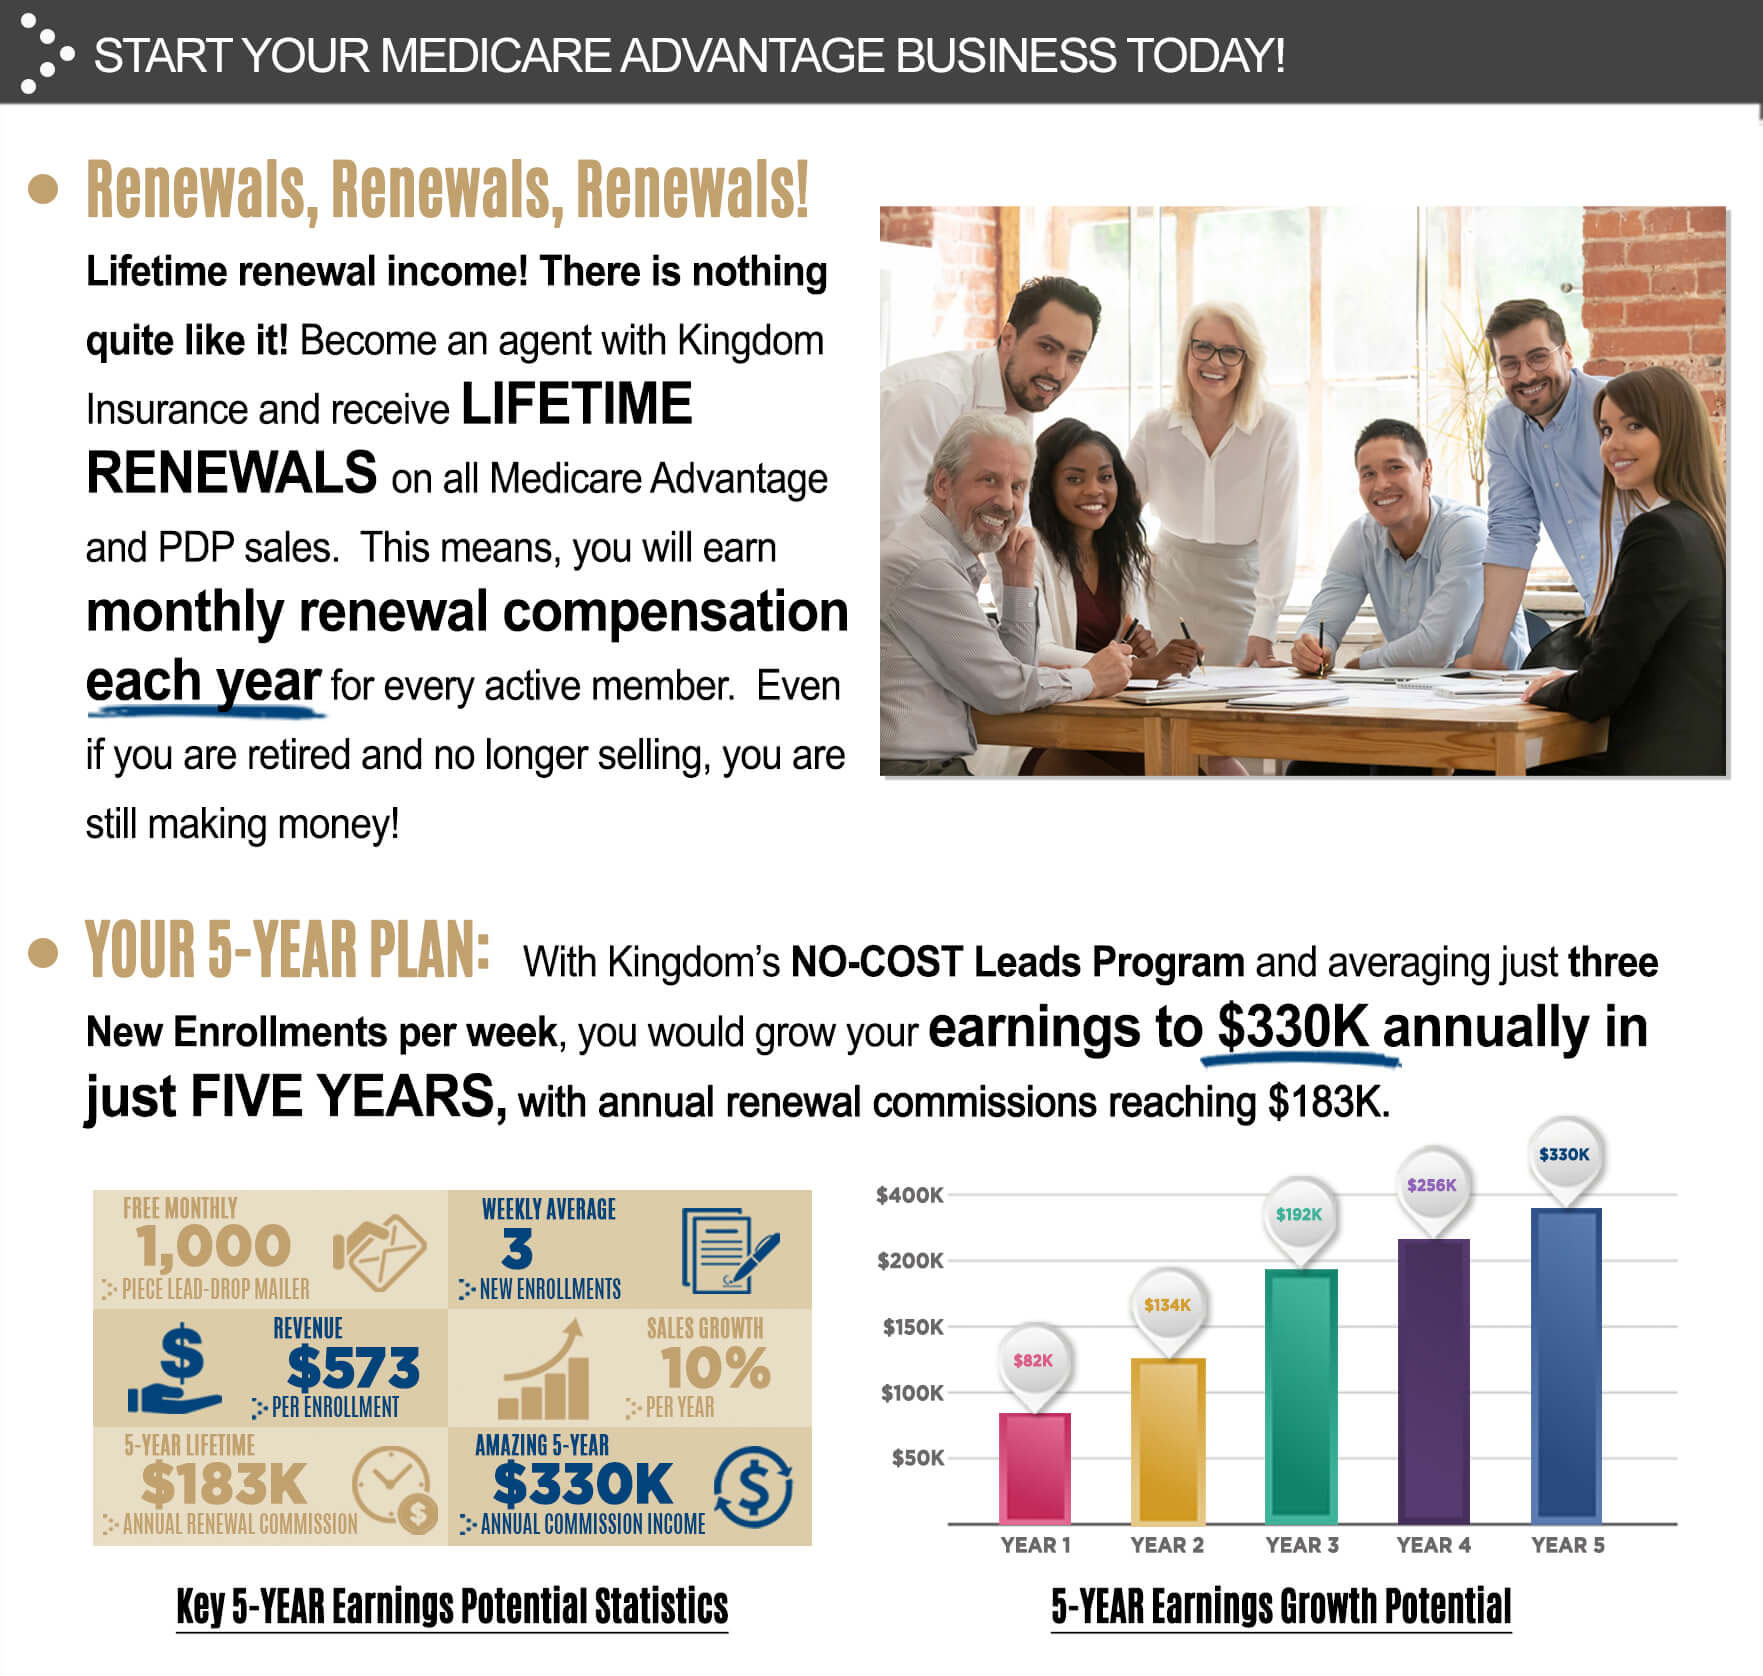 Start Your Medicare Advantage Business Today! Renewals, Renewals, Renewals! Lifetime renewal income! There is nothing quite like it! Become an agent with Kingdom Insurance and receive lifetime renewals on all Medicare Advantage and PDP sales. This means, you will earn monthly renewal compensation each year for every active member. Even if you are retire and no longer selling, you are still making money! Your 5-year Plan: With Kingdomâ€™s no-cost leads program and averaging just three new enrollments per week, you would grow your earnings to $330,000 annually in just five years, with annual renewal commissions reaching $183,000.